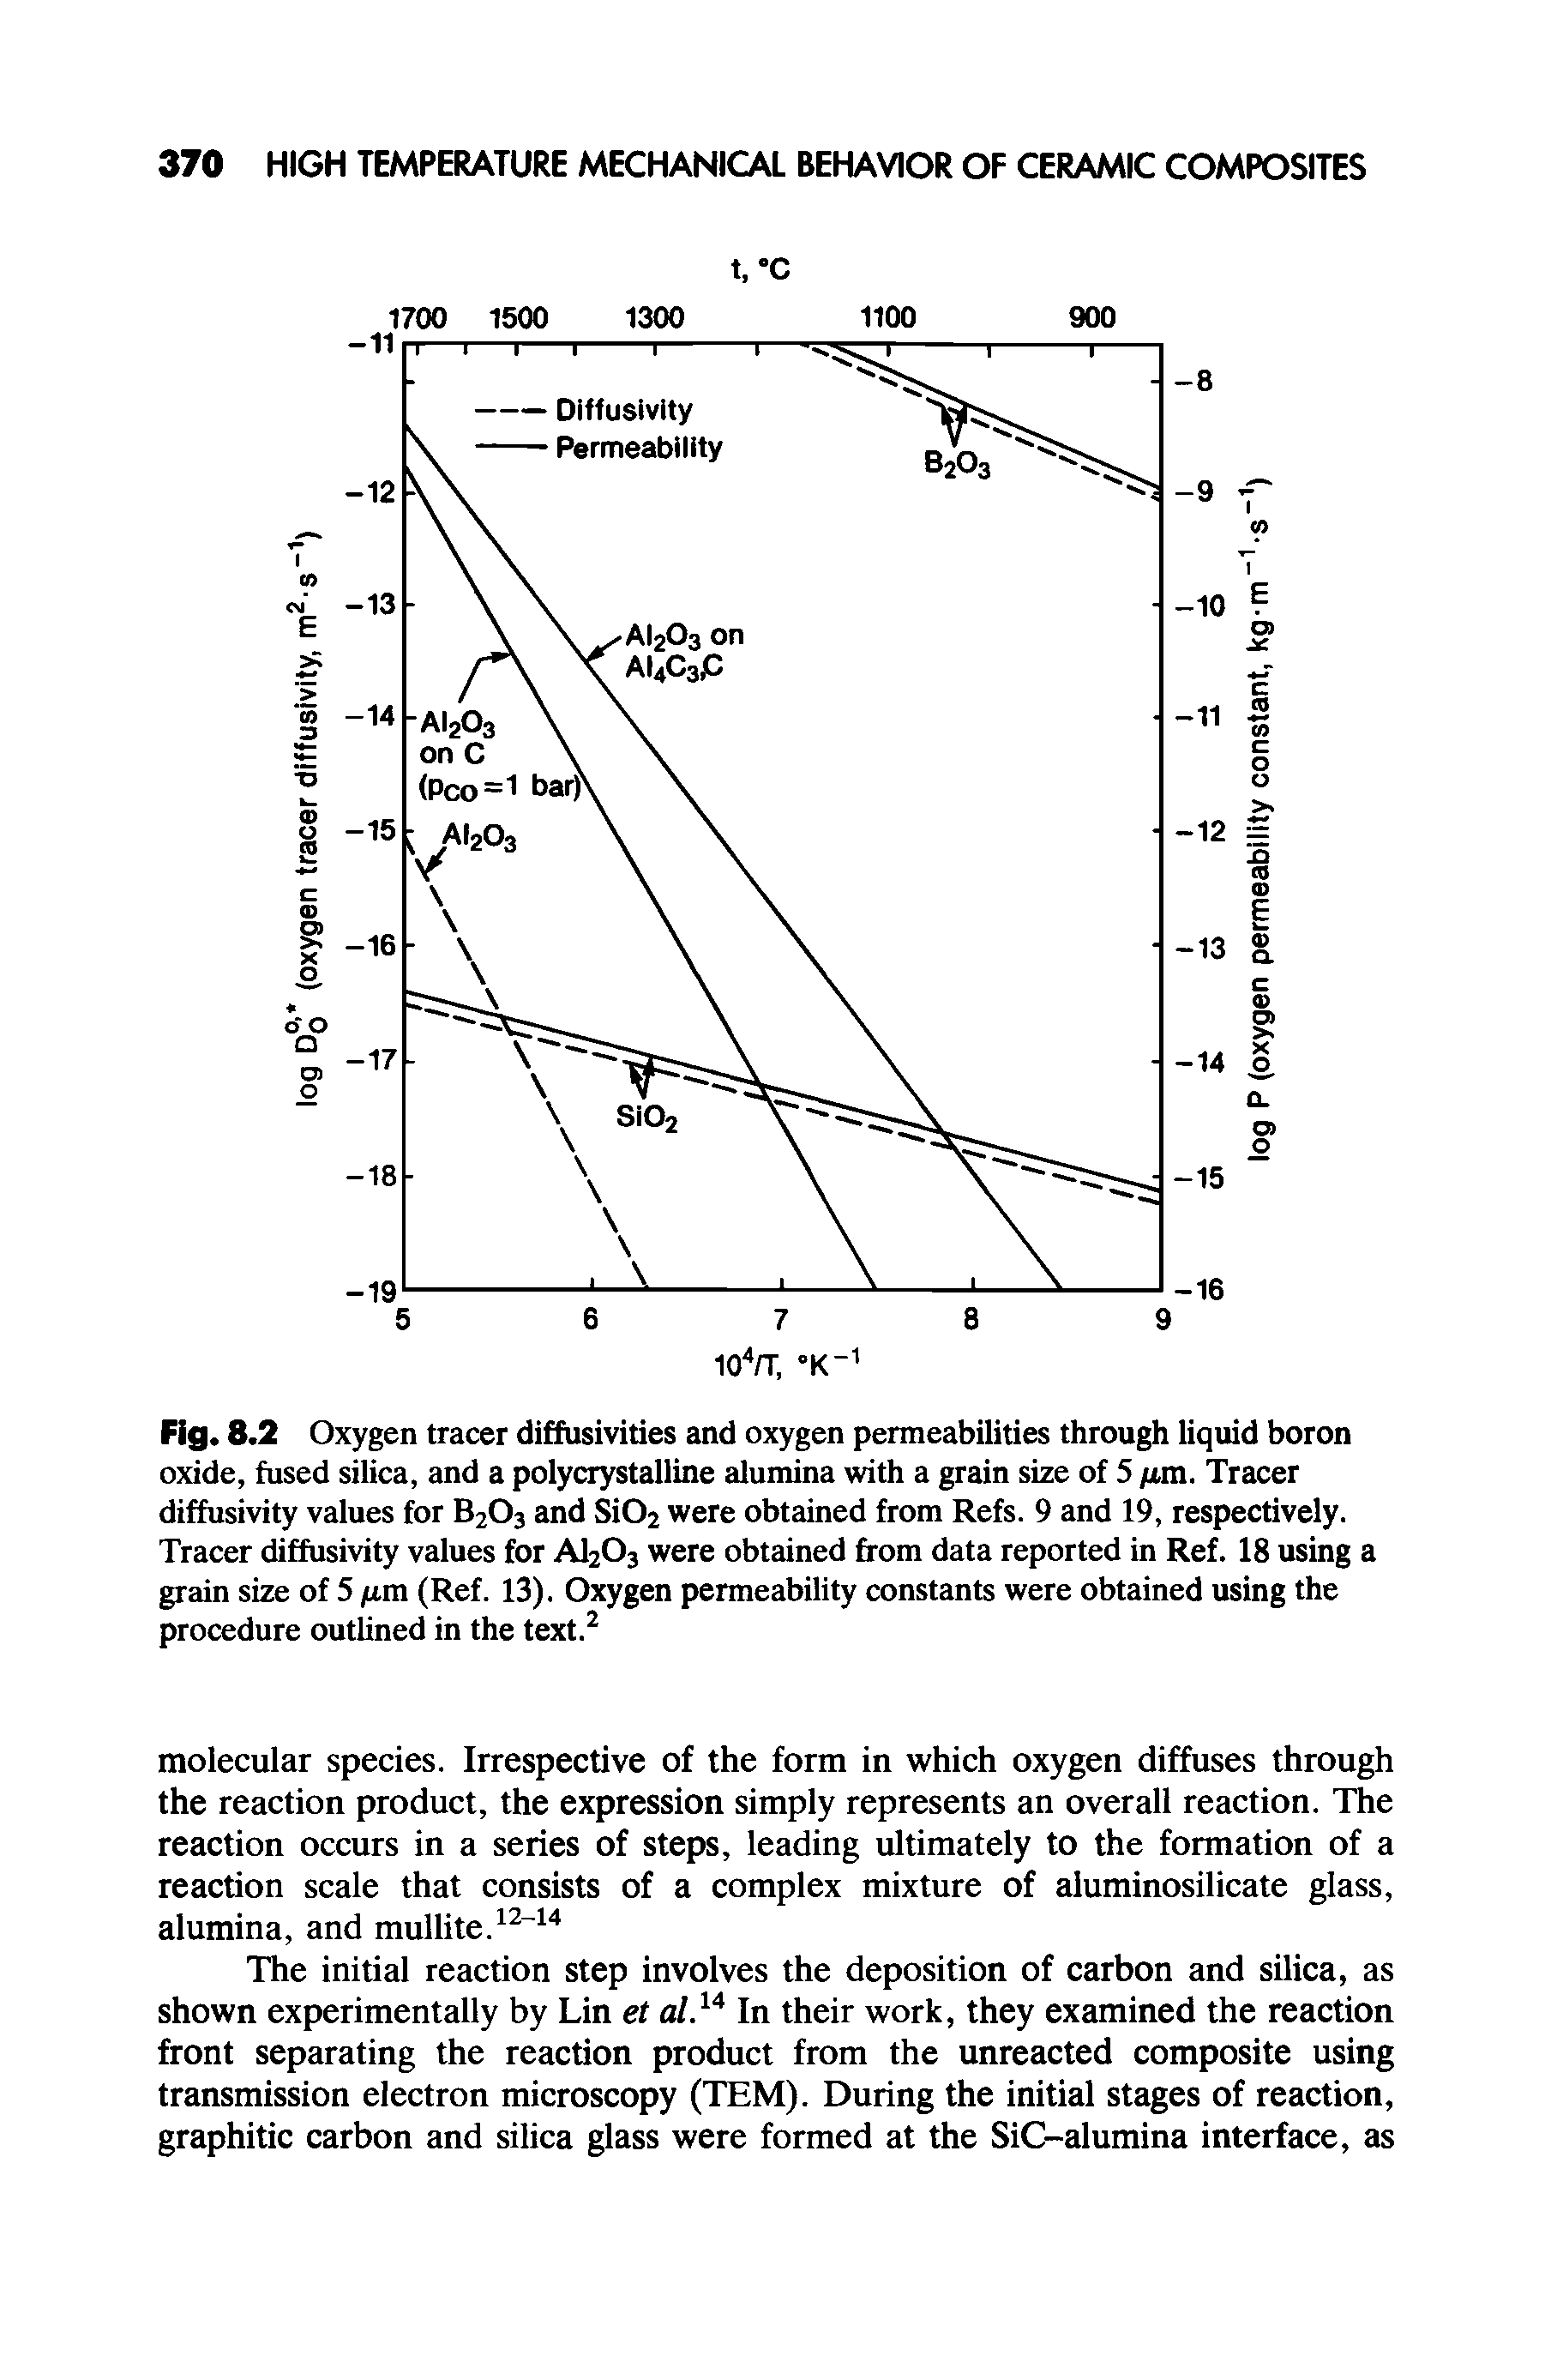 Fig. 8.2 Oxygen tracer diffusivities and oxygen permeabilities through liquid boron oxide, fused silica, and a polycrystalline alumina with a grain size of 5 nm. Tracer diffusivity values for B203 and Si02 were obtained from Refs. 9 and 19, respectively. Tracer diffusivity values for A1203 were obtained from data reported in Ref. 18 using a grain size of 5 /im (Ref. 13). Oxygen permeability constants were obtained using the procedure outlined in the text.2...